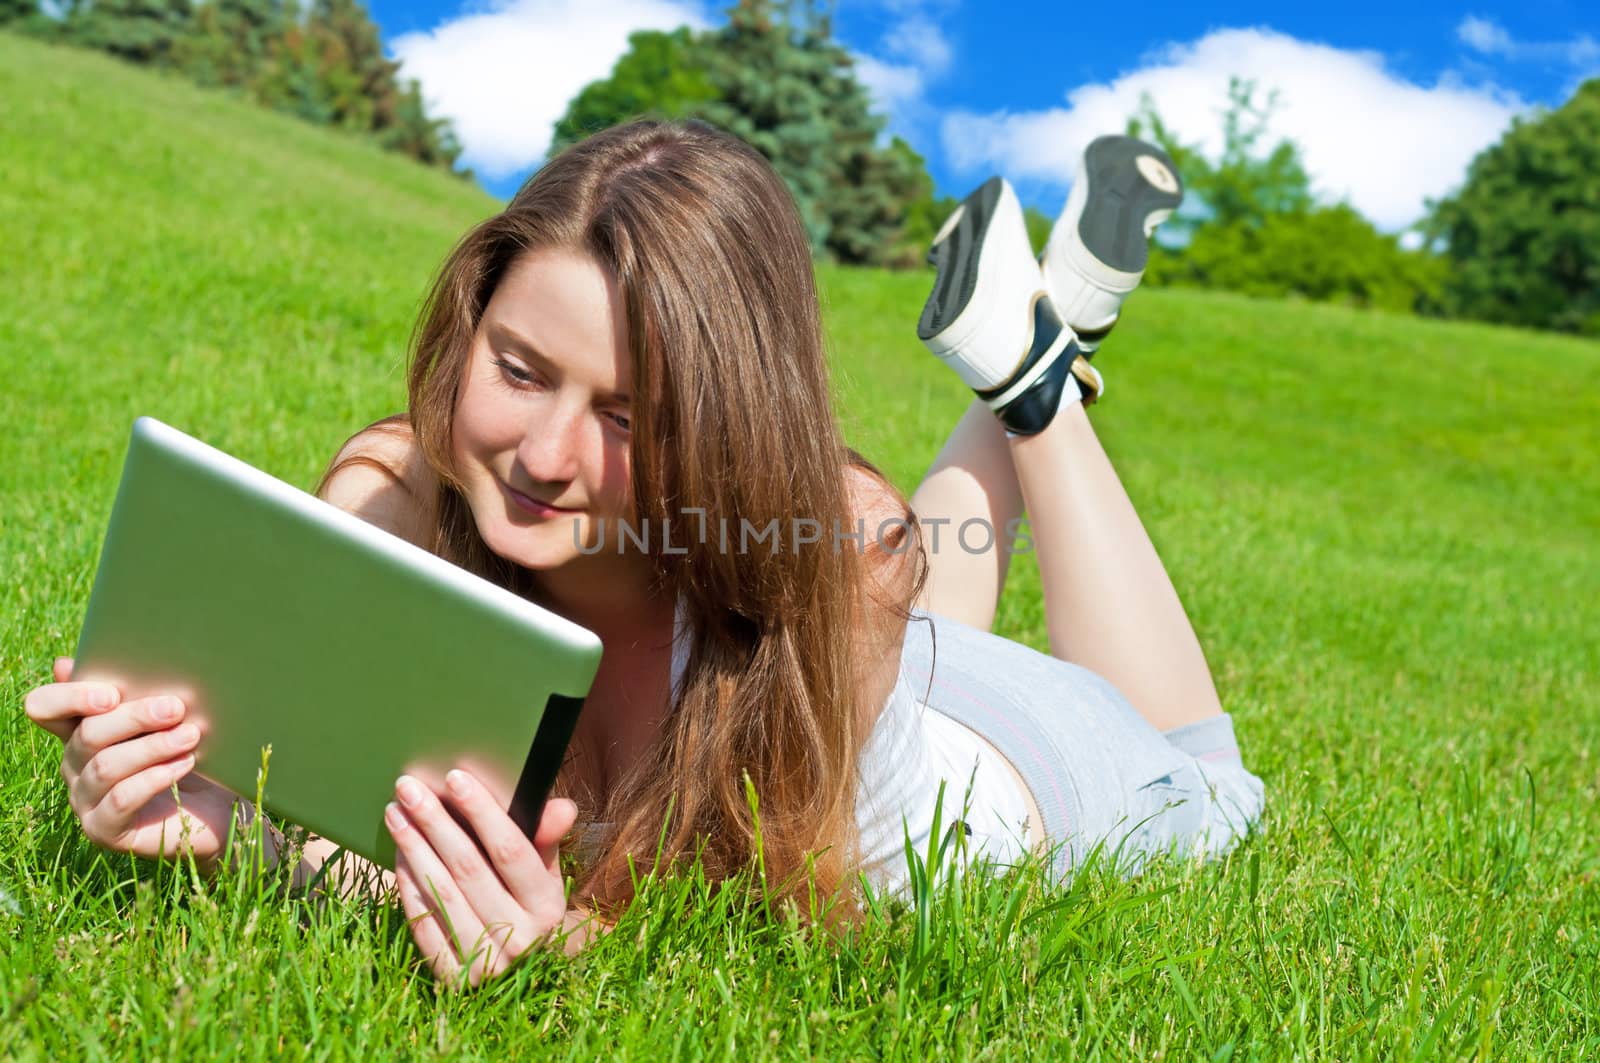 Pretty girl with tablet lying on grass in park.